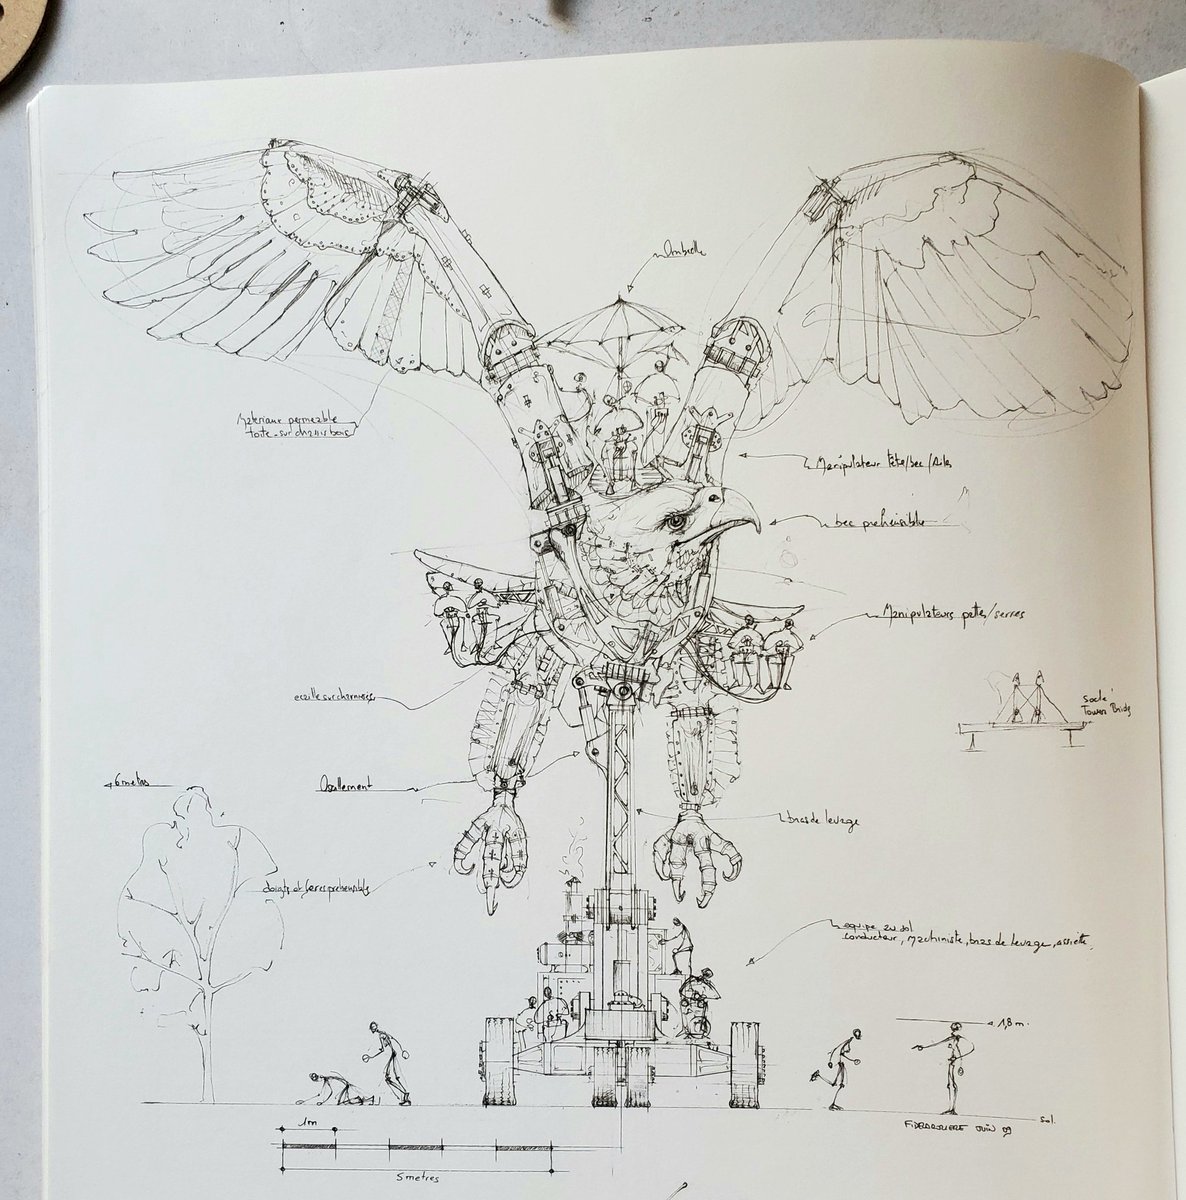 I'm going to start sharing art books that I keep near me for inspiration, with the tag #StudioShelf! Here is BESTIARY, MACHINES & ORNAMENTS, sketches & designs by François Delarozière, puppeteer & art director of the La Machine company, makers of massive performing machines. 